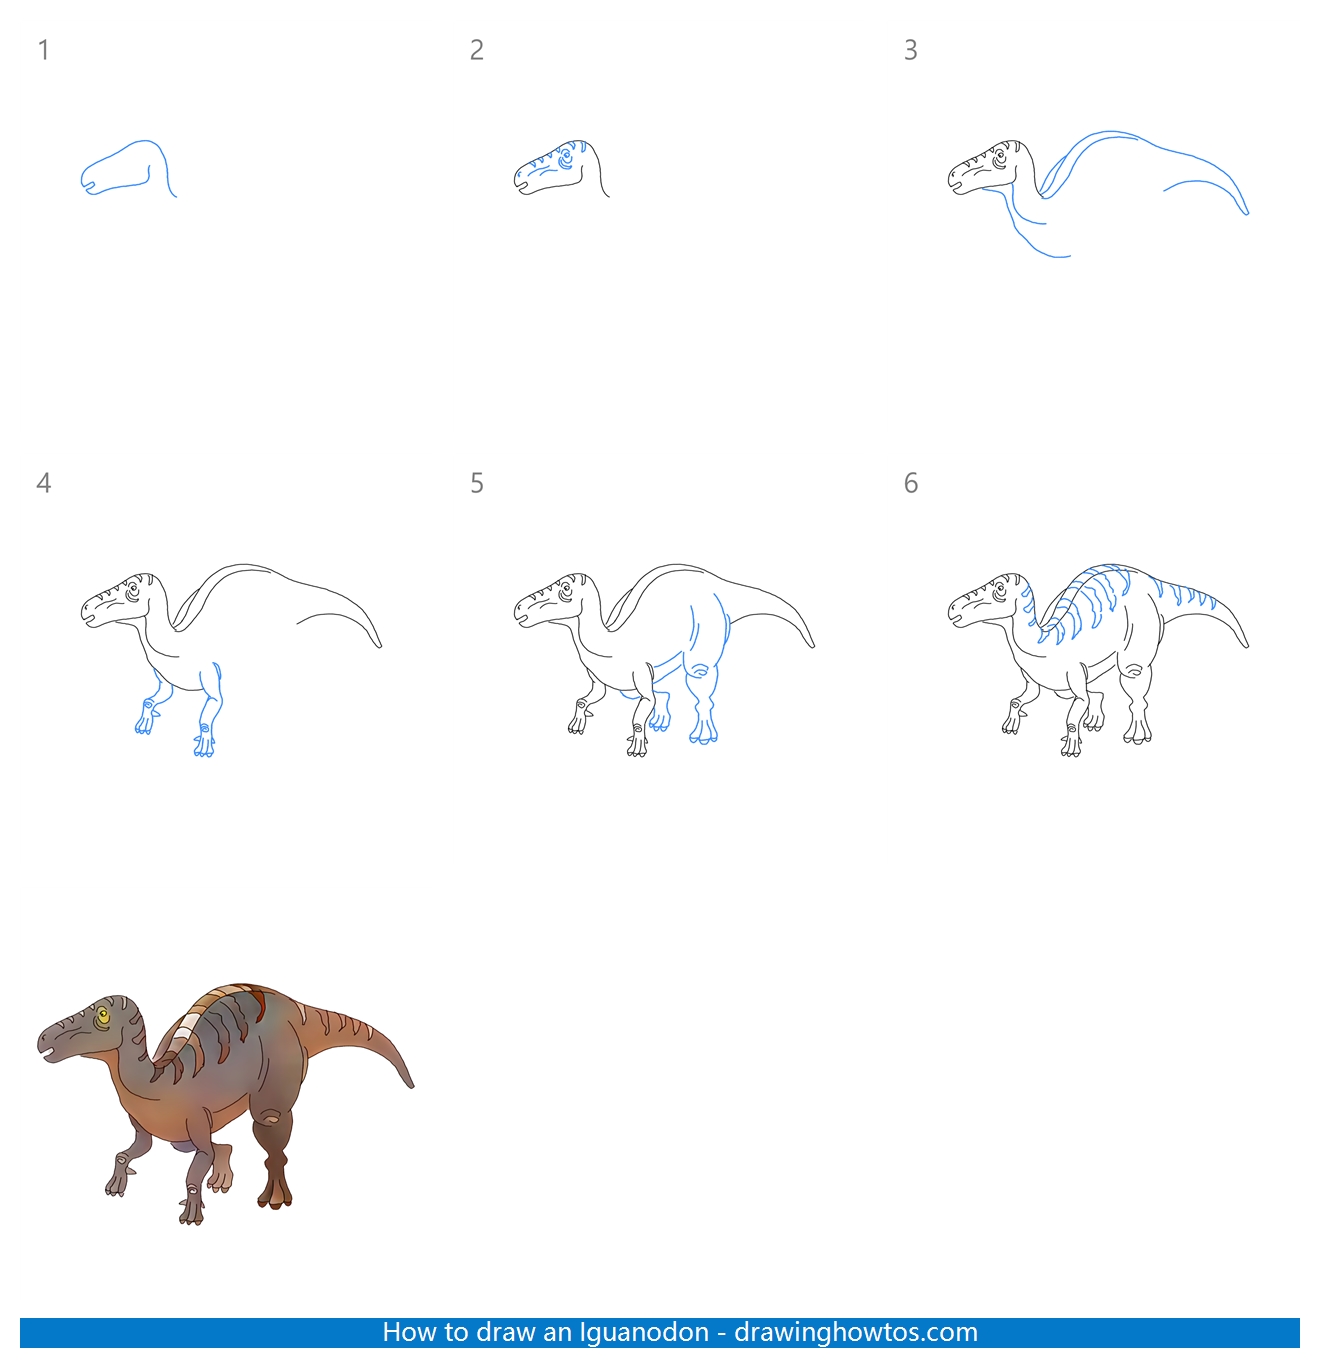 How to Draw an Iguanodon Step by Step